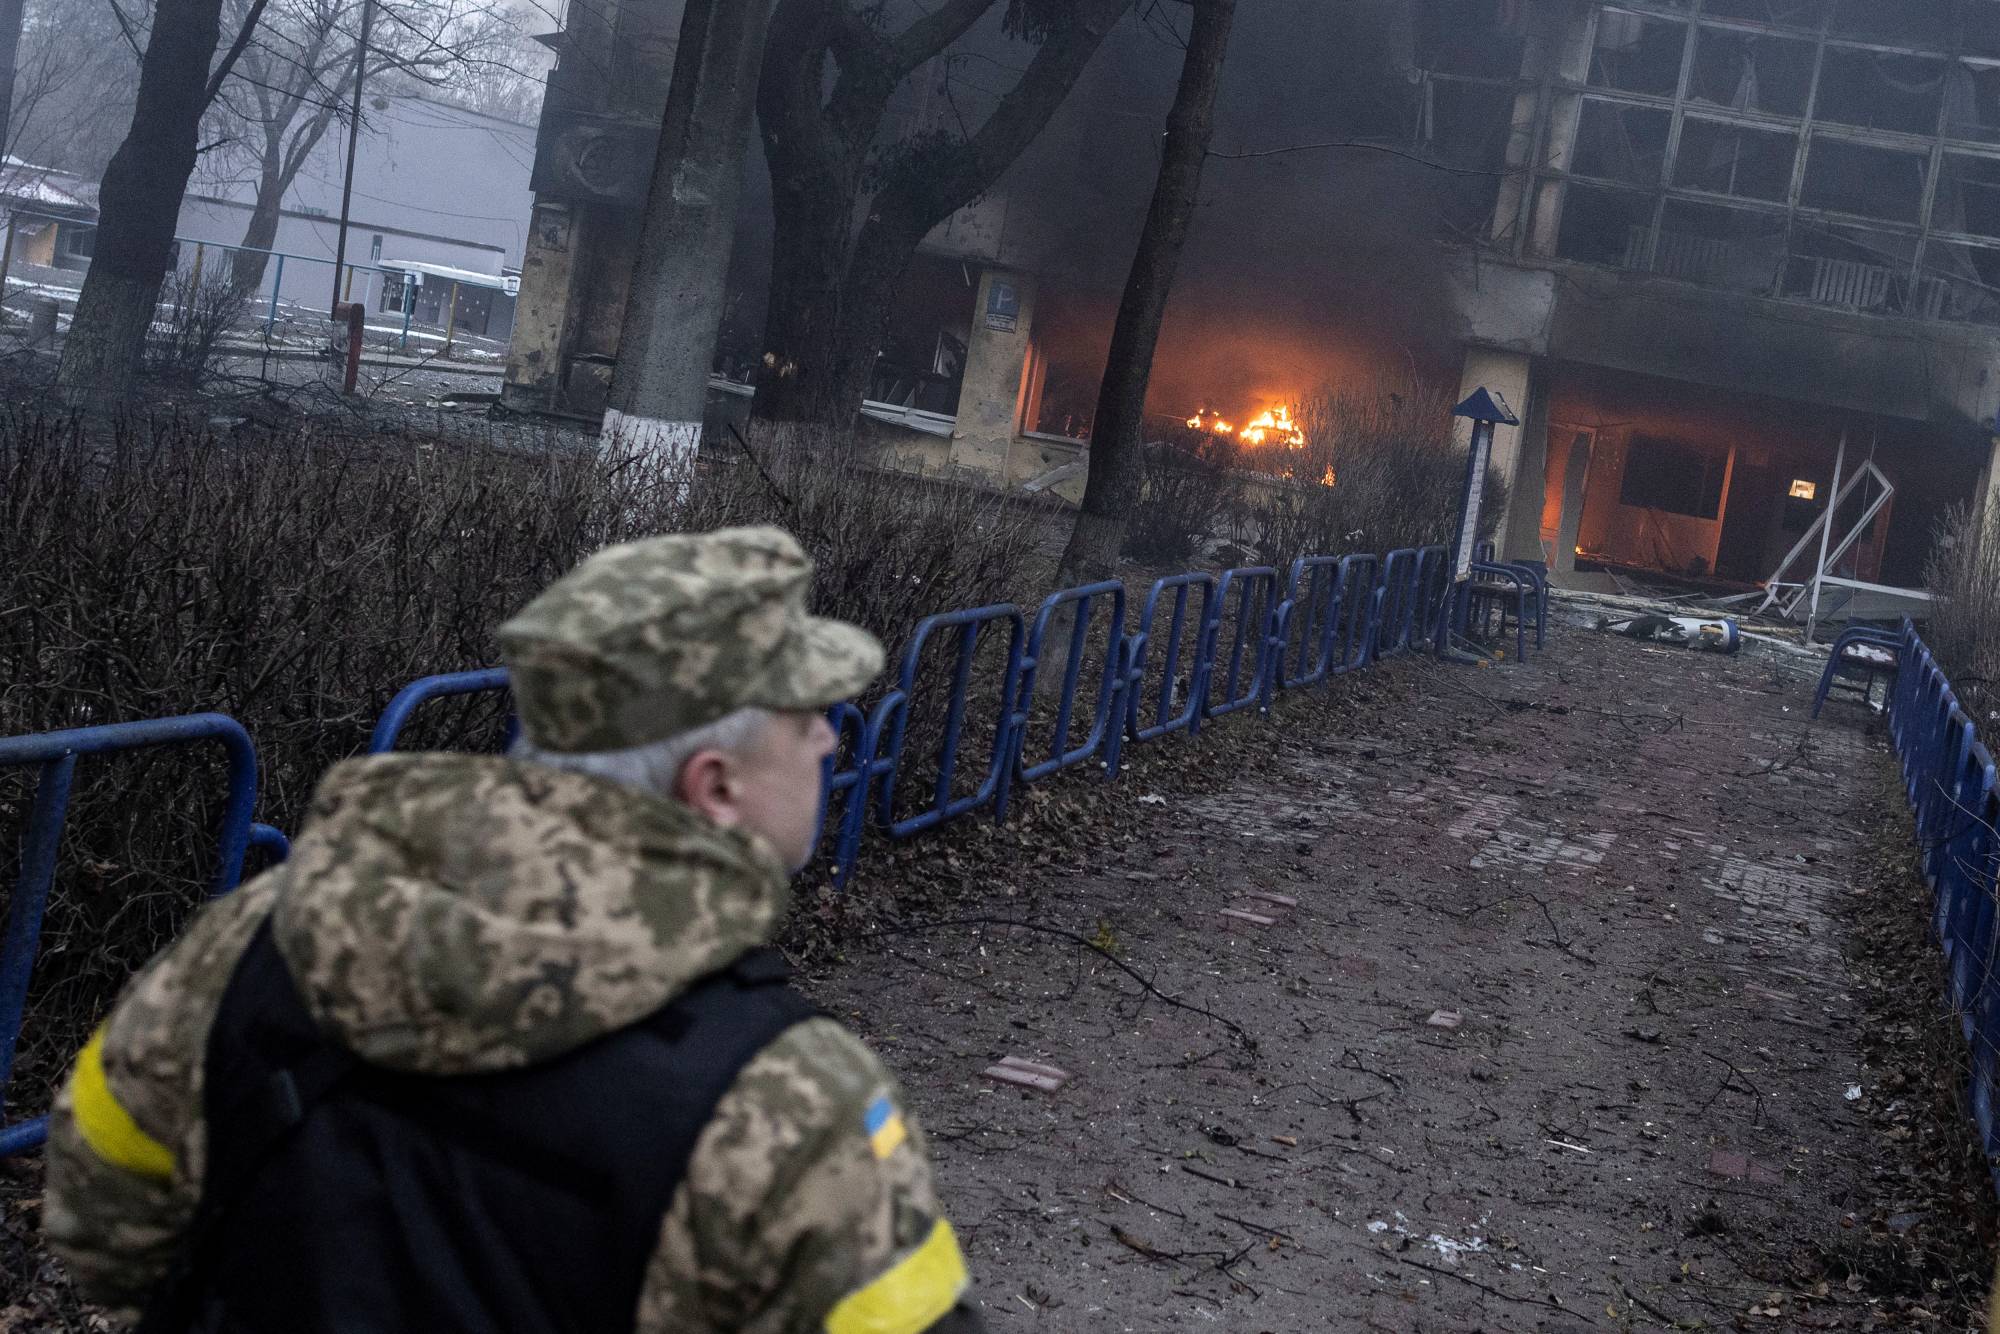 A member of the Ukrainian military walks near a building after a blast, amid Russia's invasion in Kyiv on Tuesday. | REUTERS